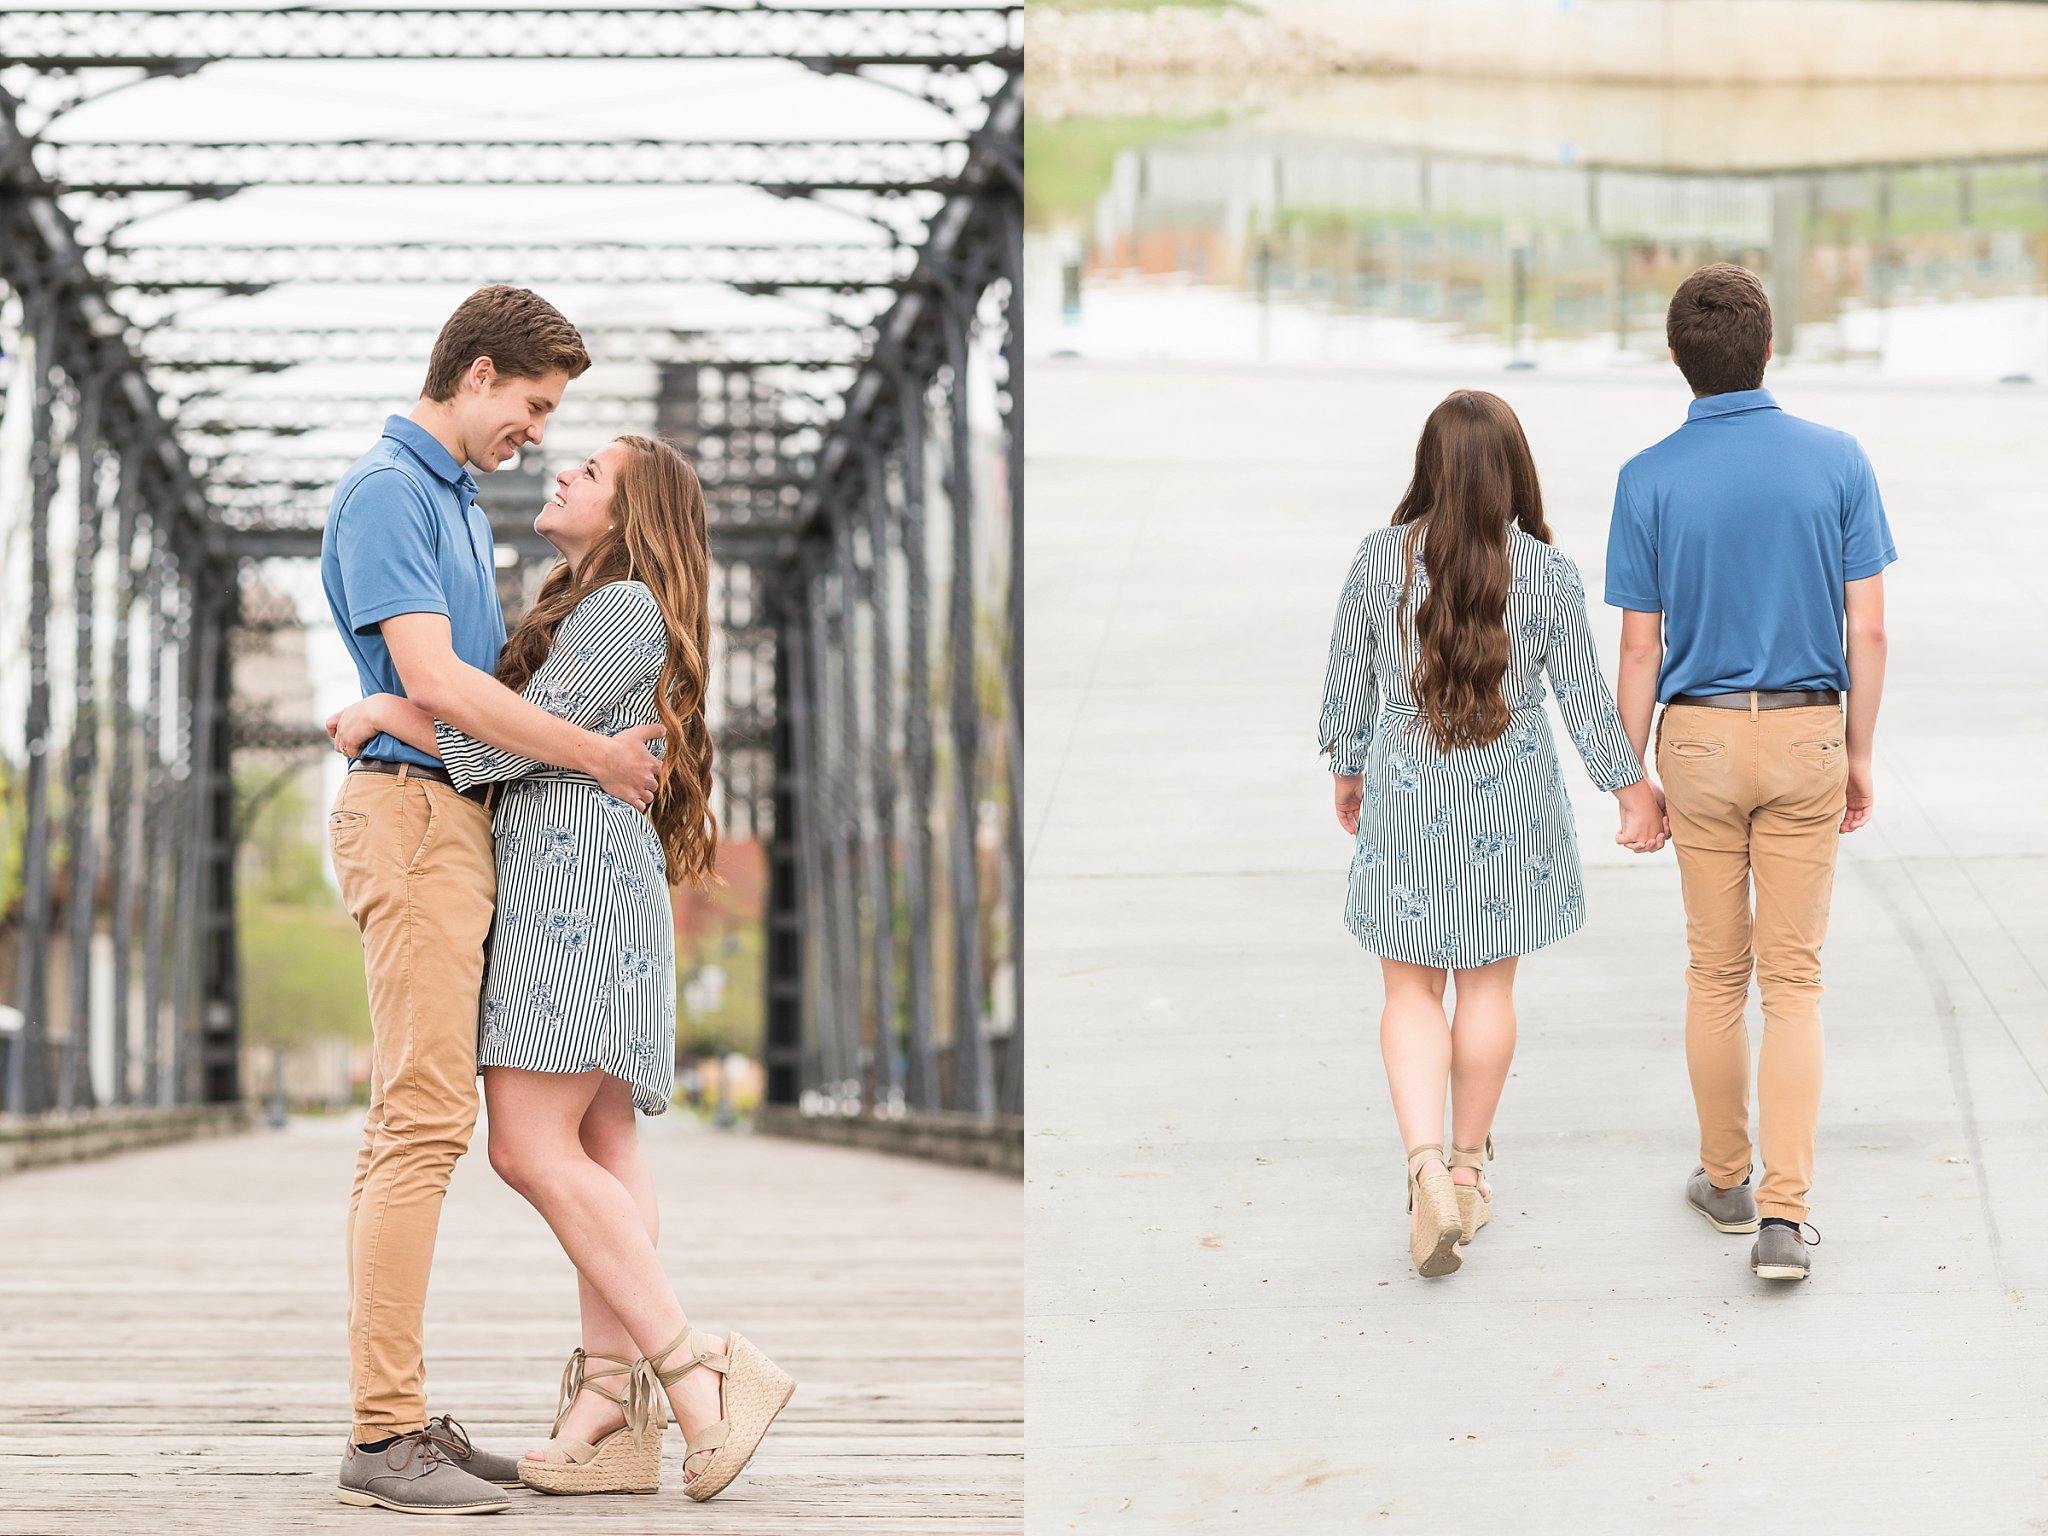 Promenade Park Engagement session photos by Simply Seeking Photography